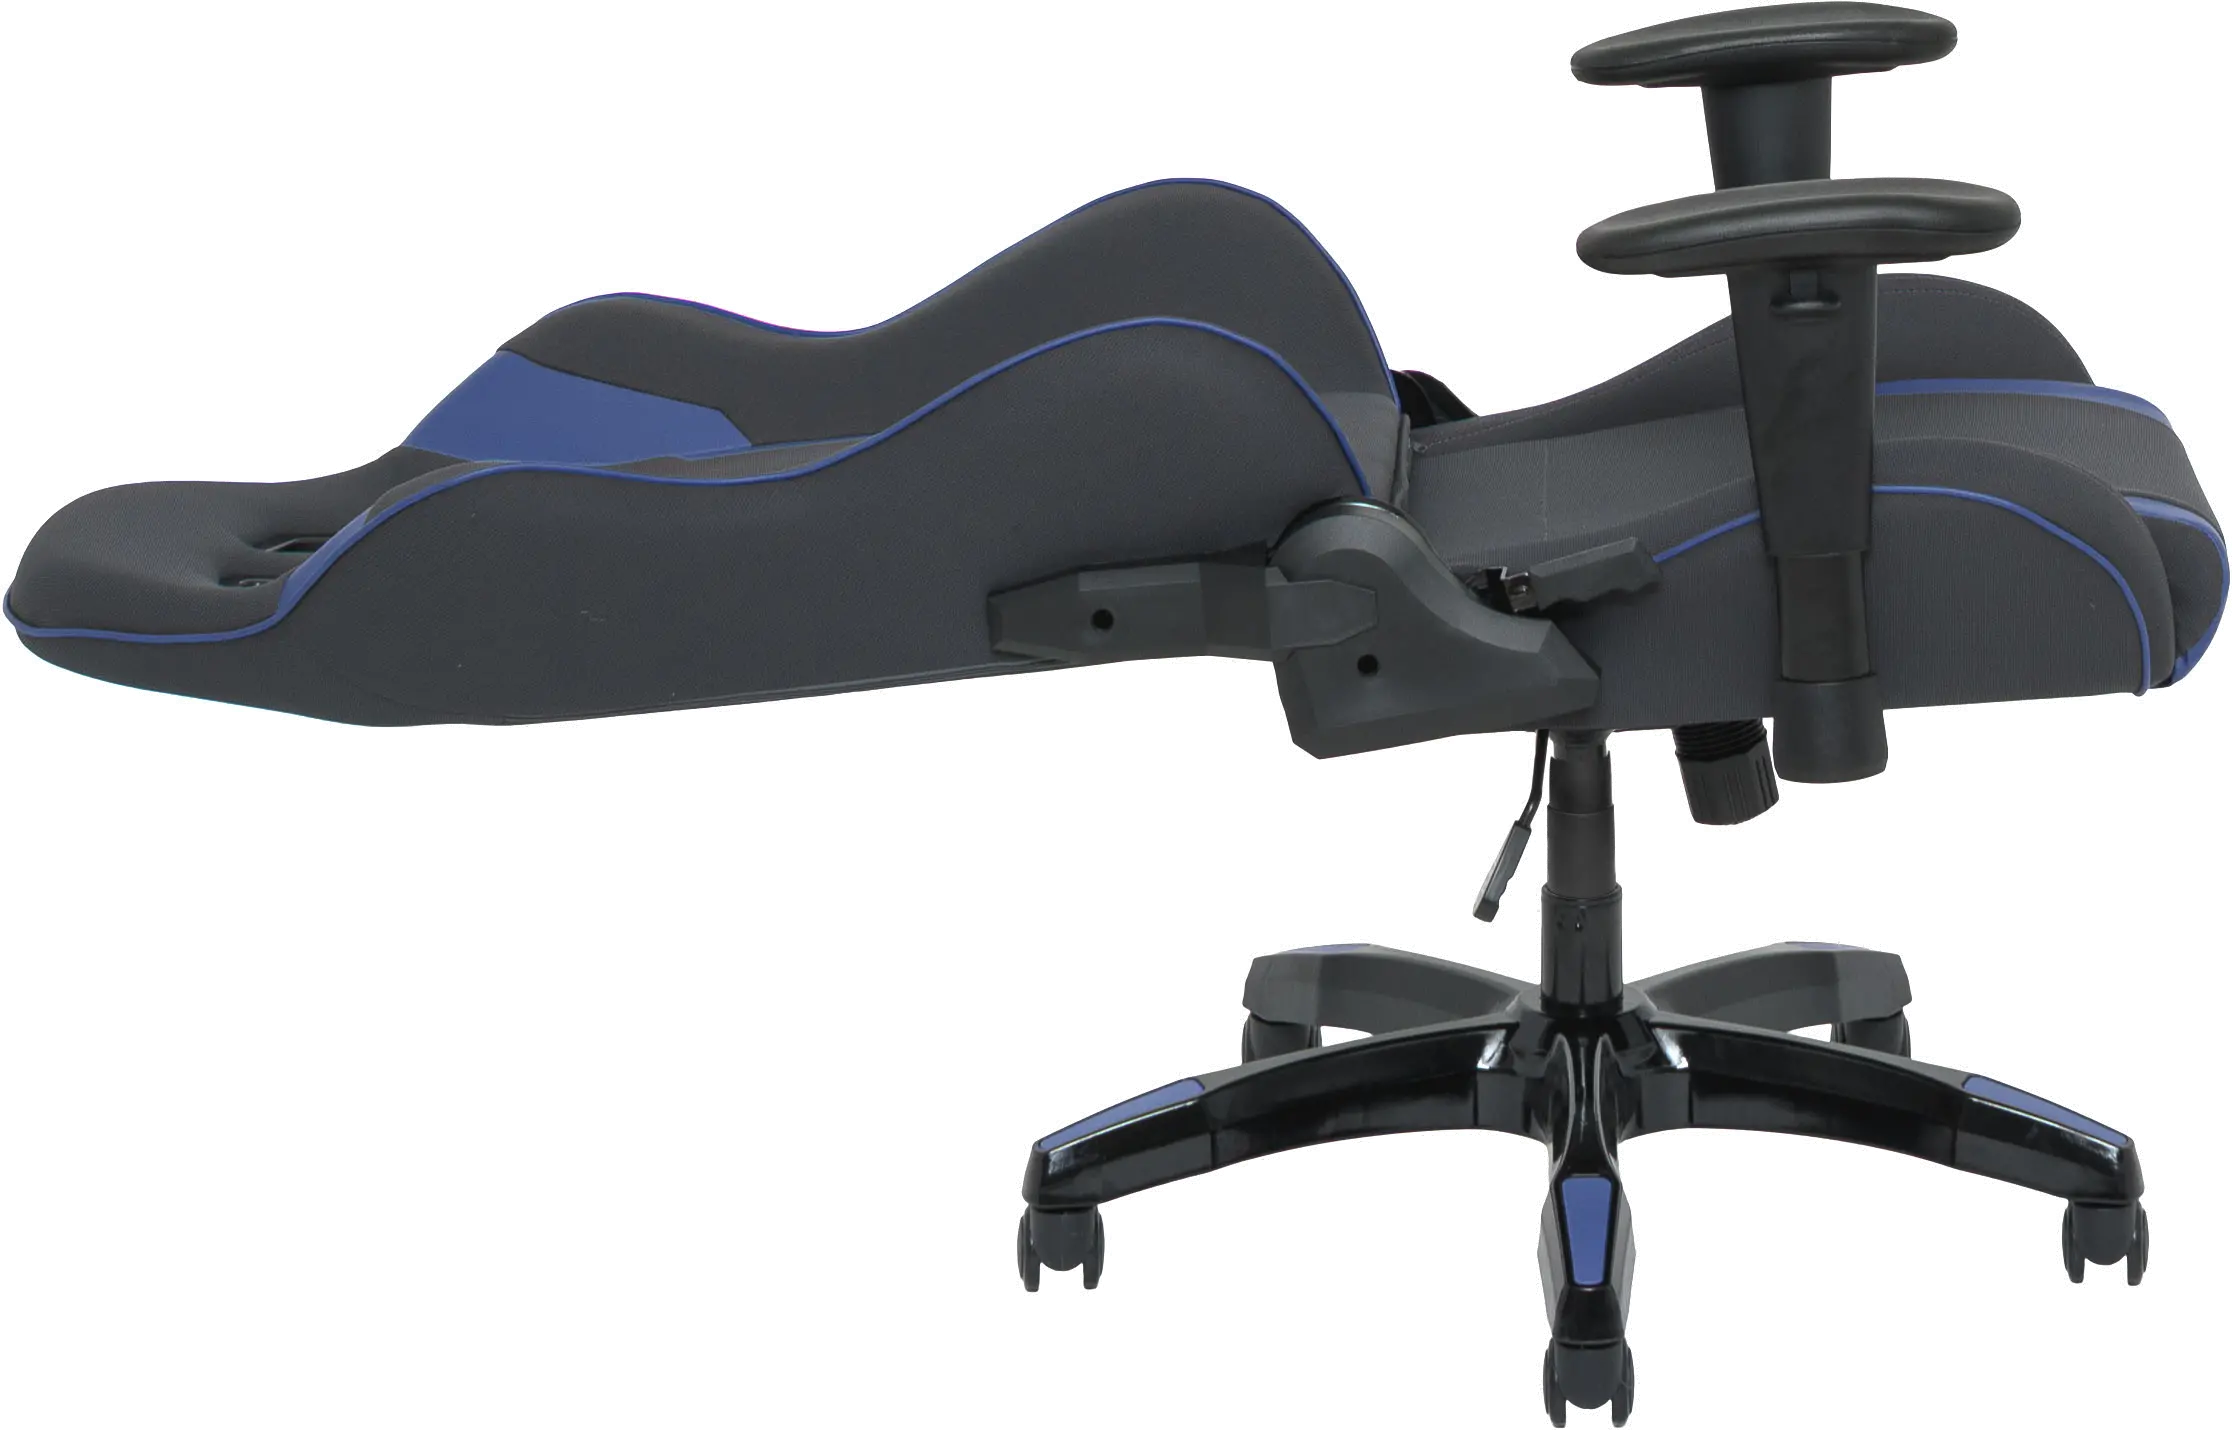 Workspace Gray and Blue Gaming Desk Chair